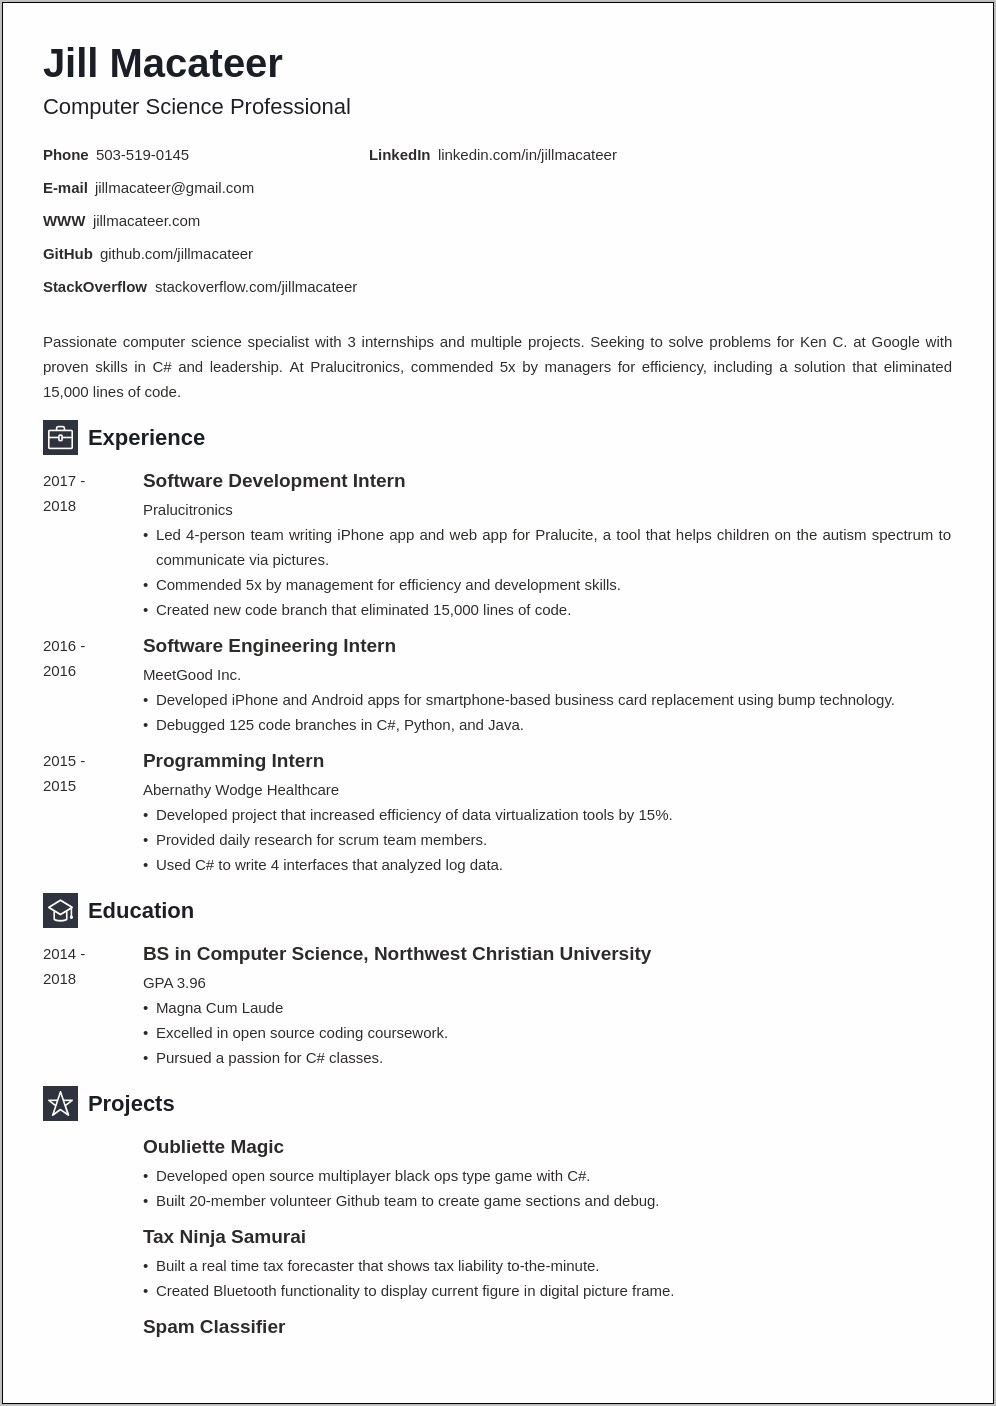 Resume Objective For It Tech Computer